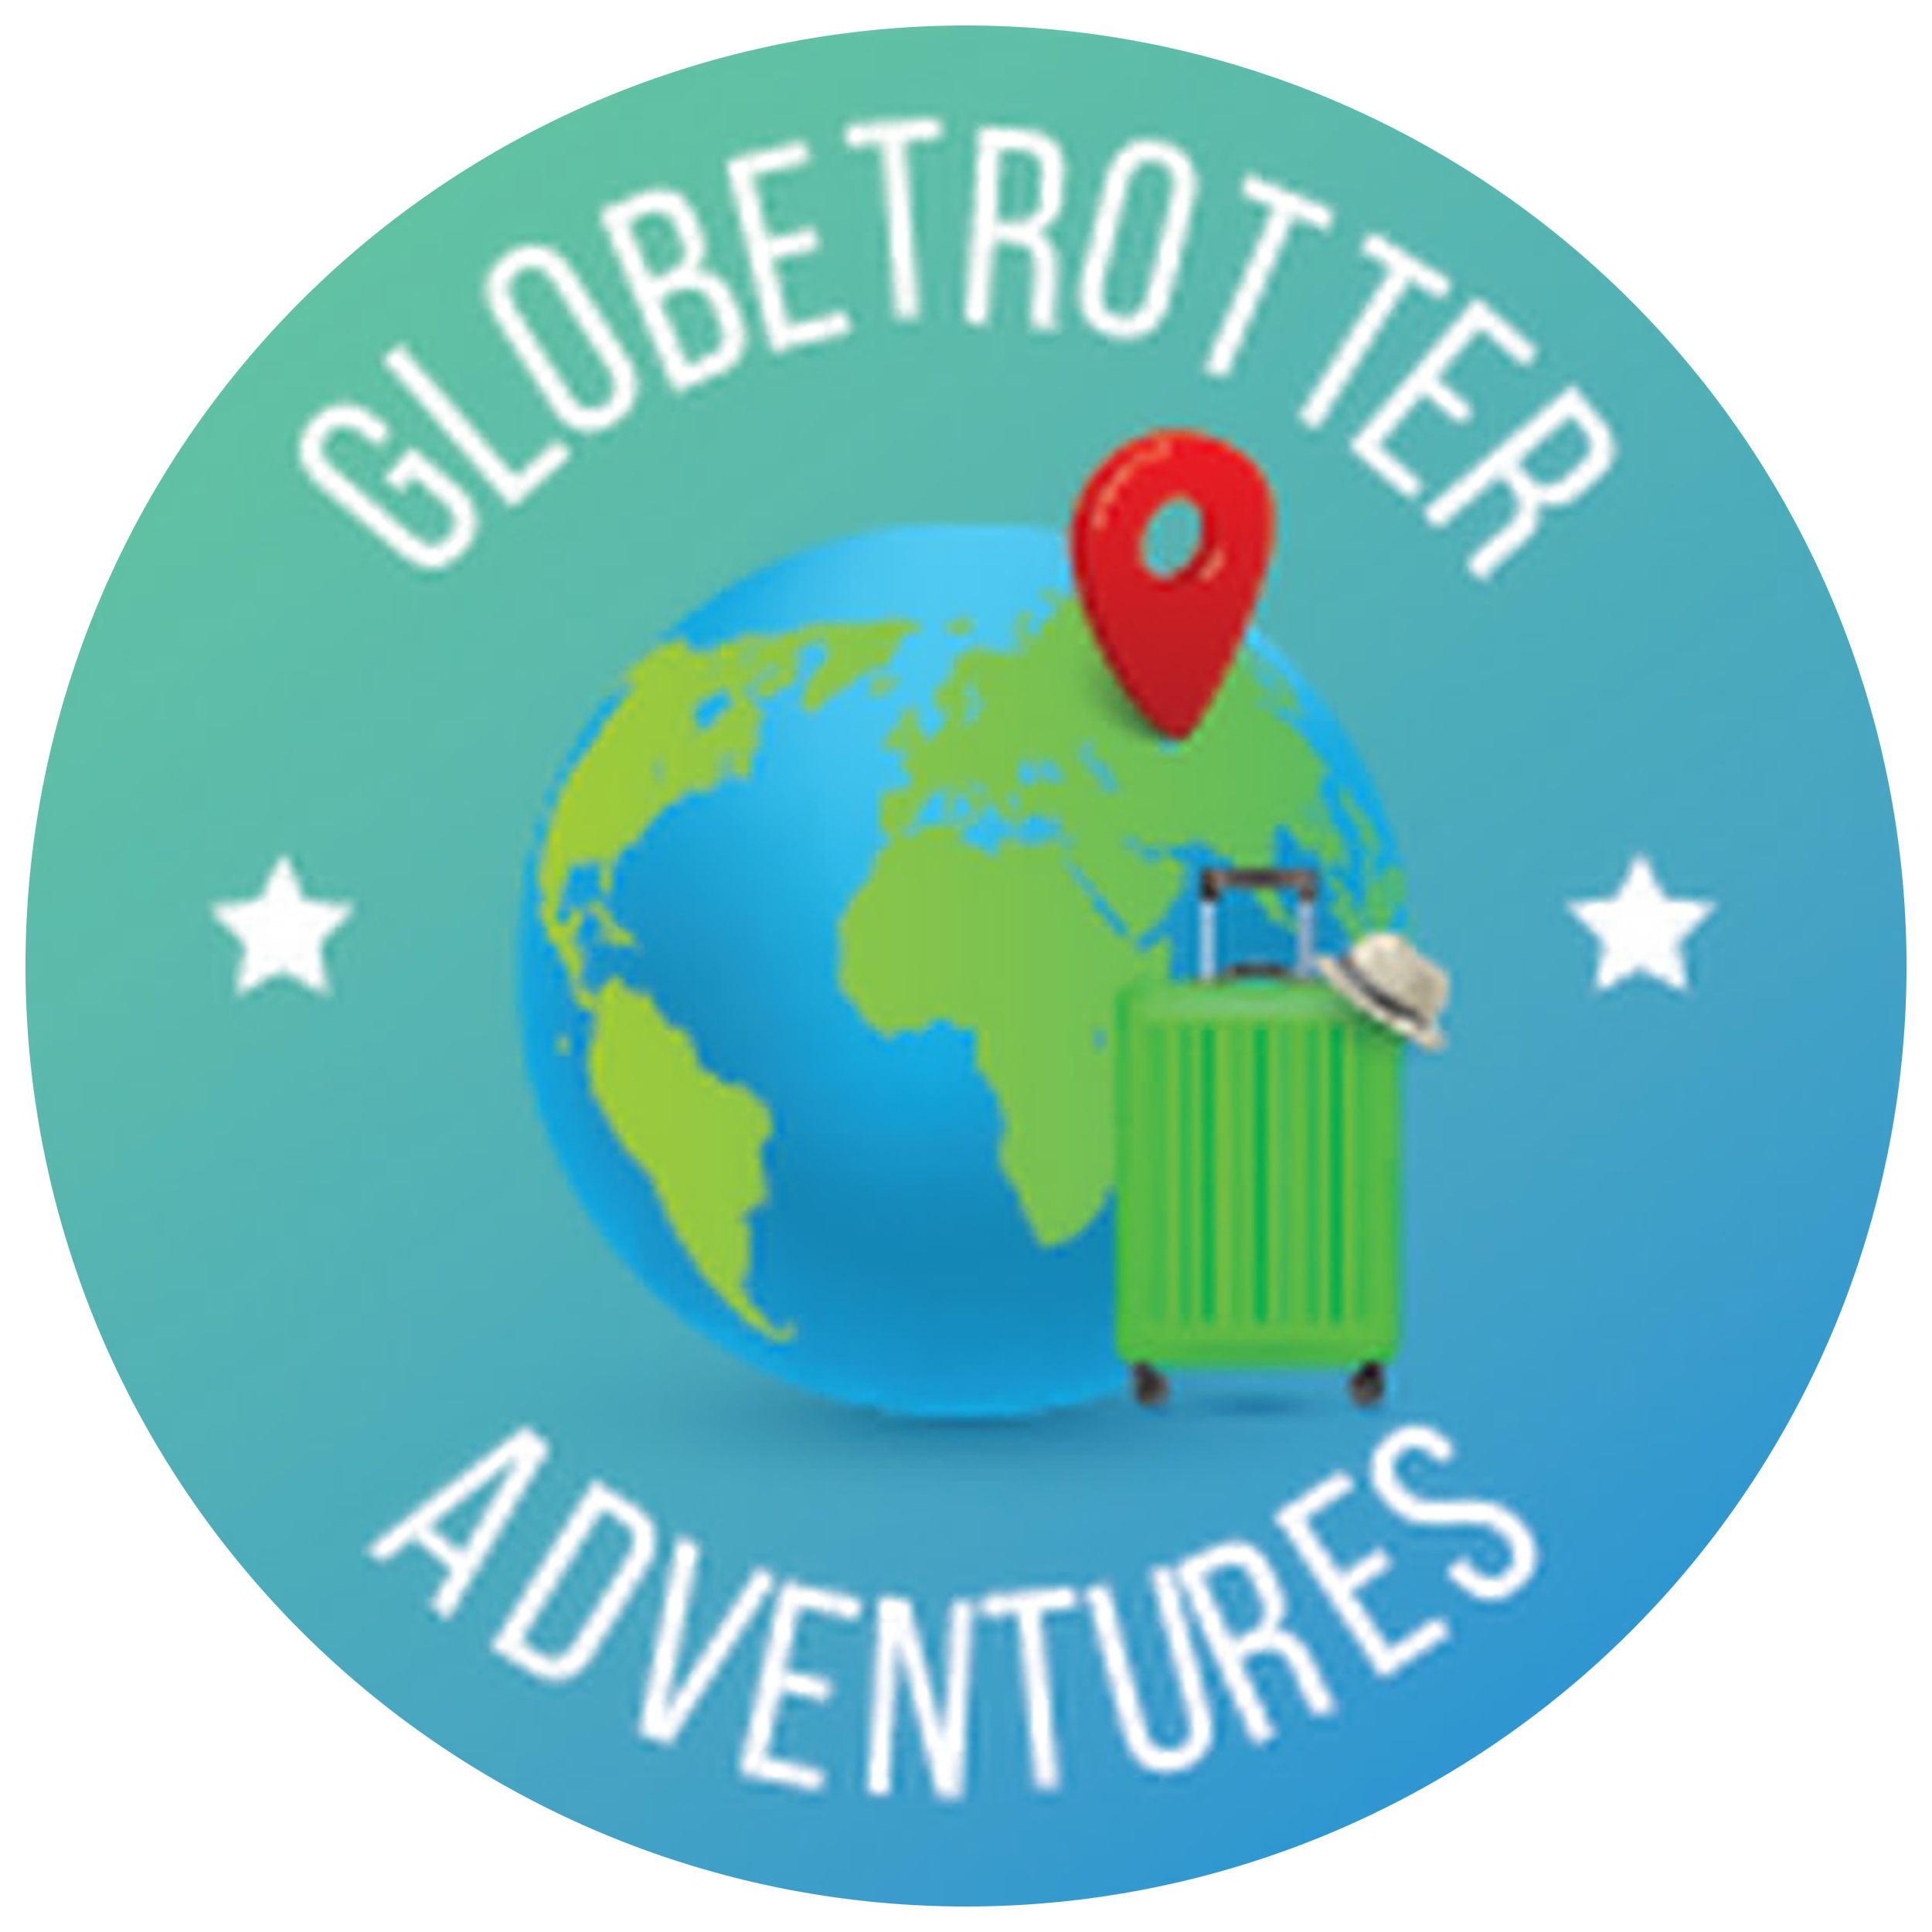 globetrotters travel group